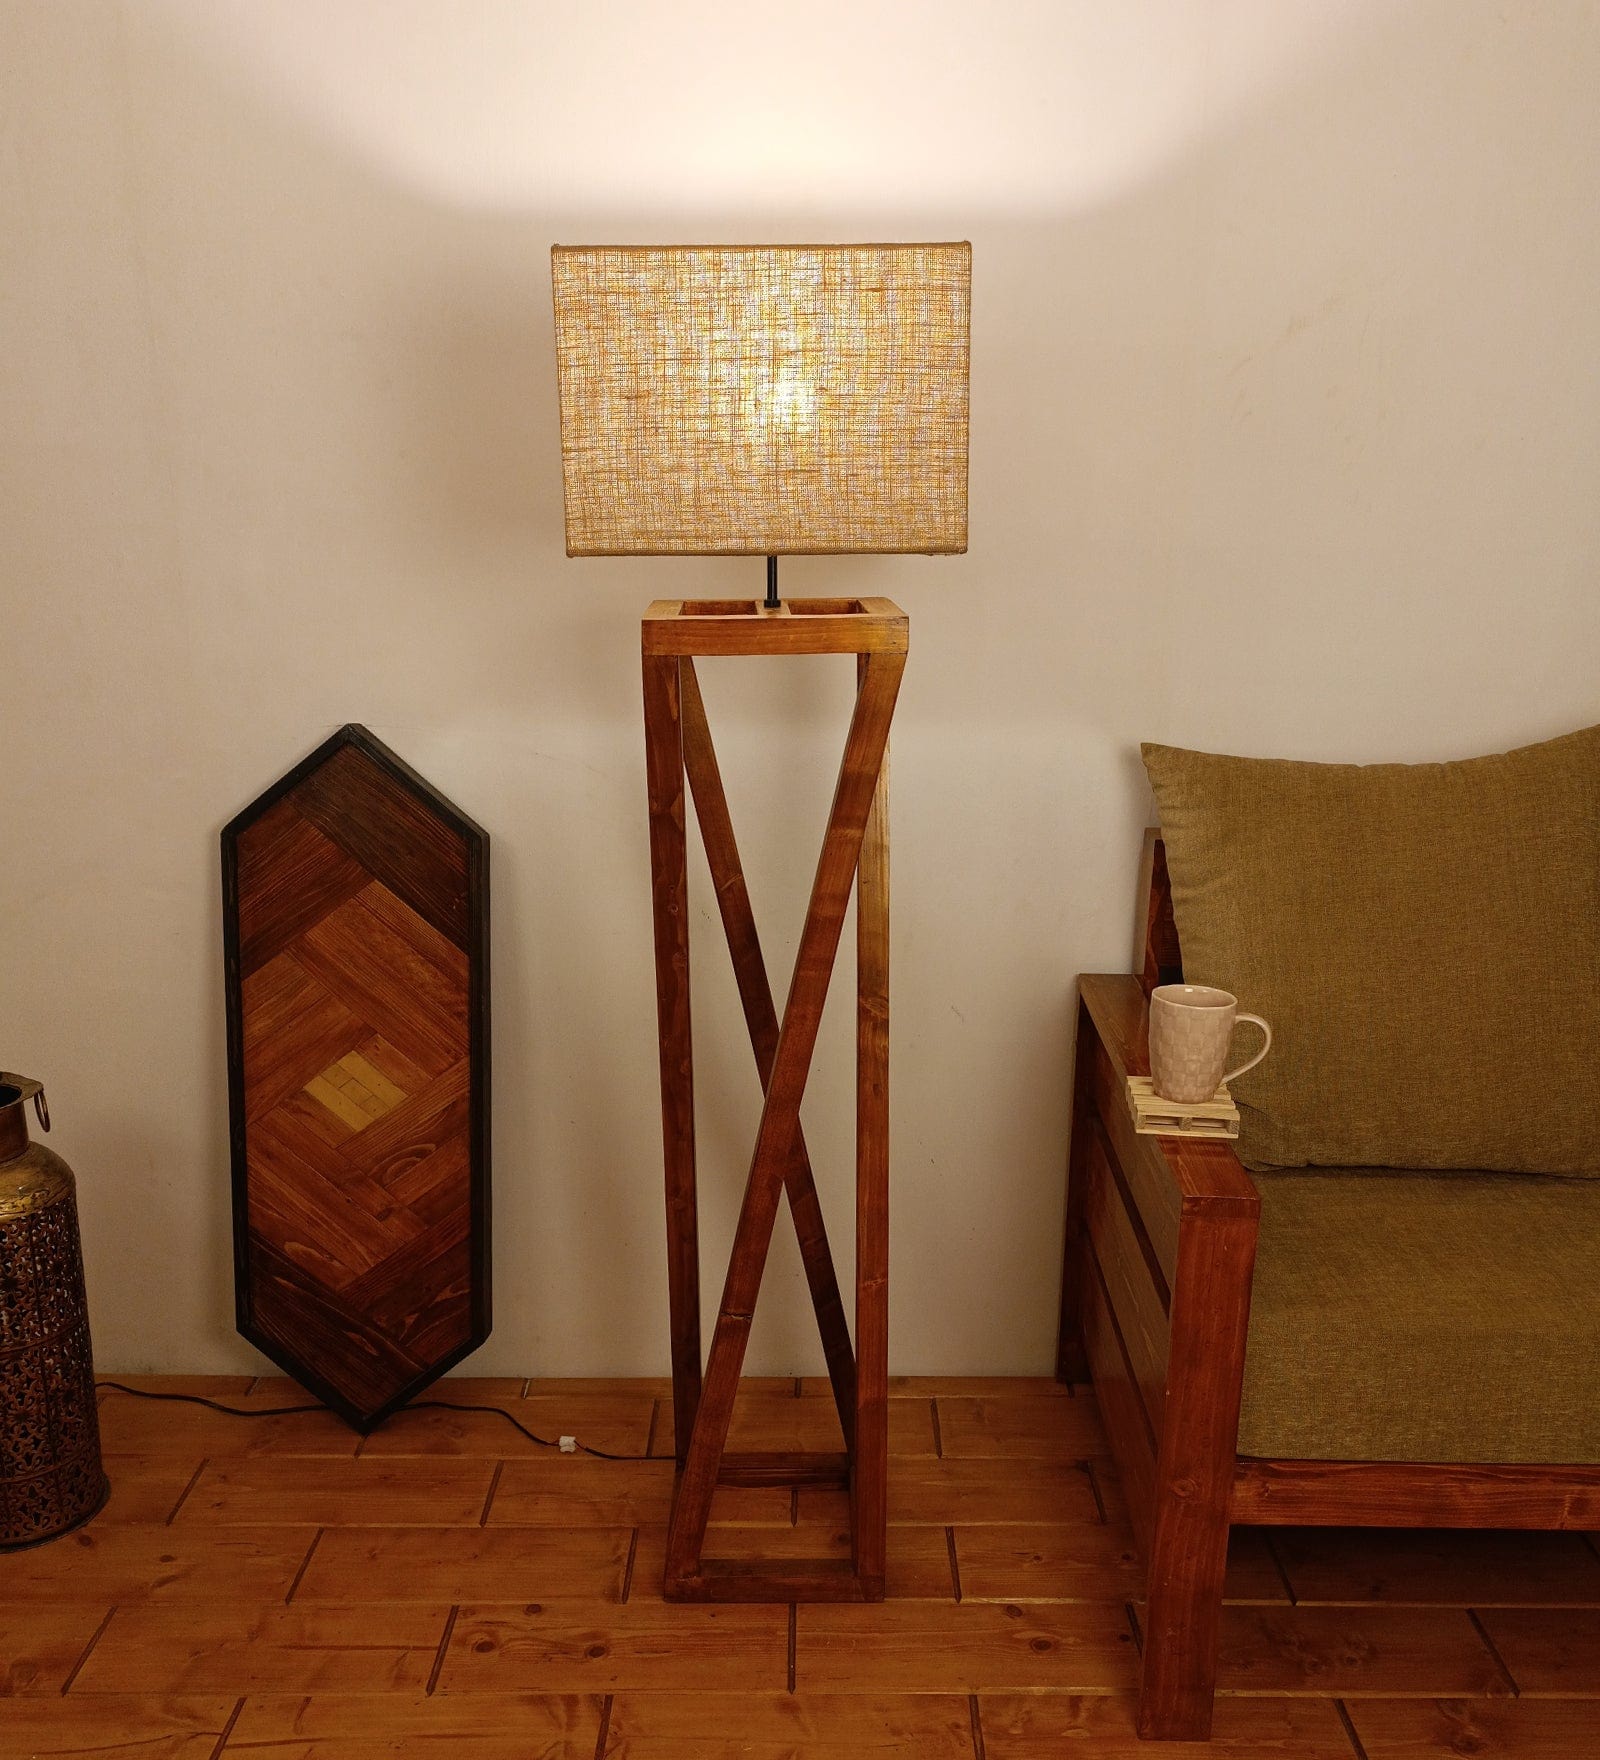 Remy Wooden Floor Lamp with Brown Base and Beige Fabric Lampshade (BULB NOT INCLUDED)